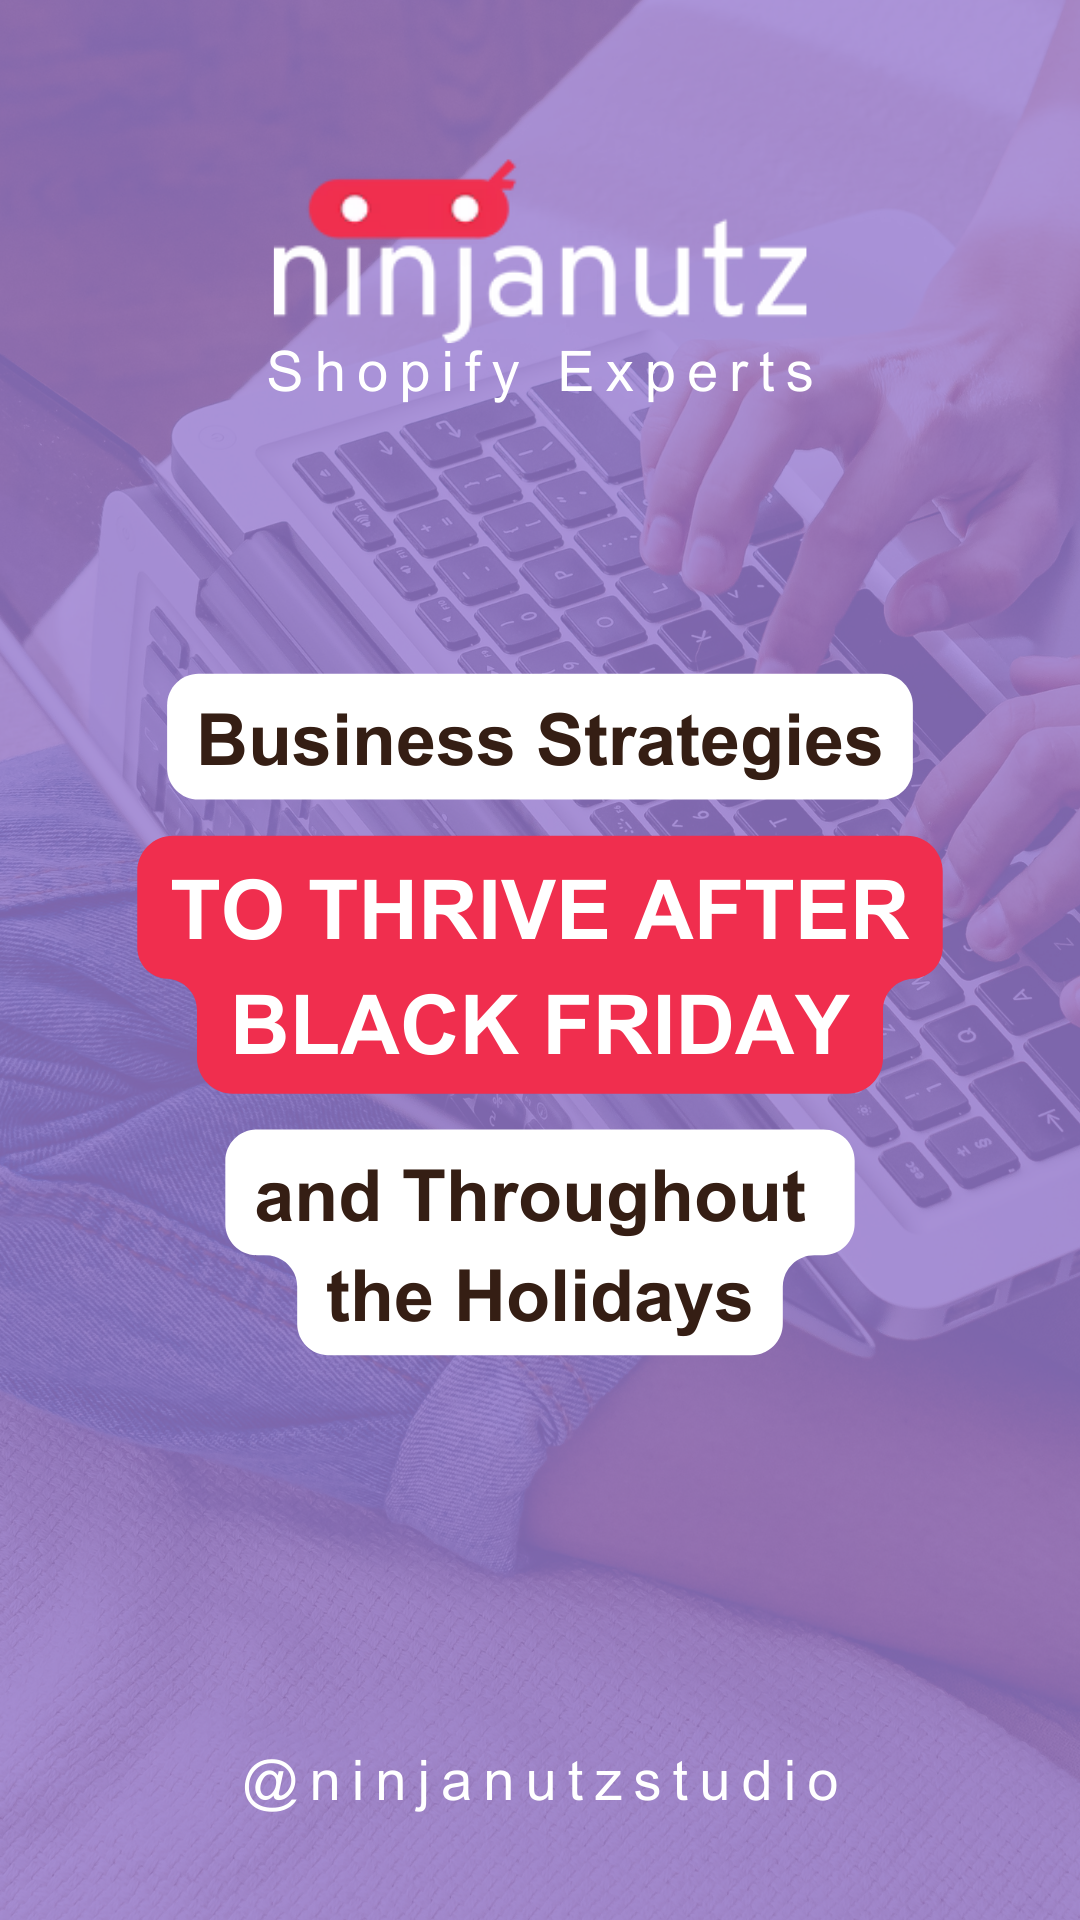 Business Strategies to Thrive After Black Friday and Throughout the Holidays NinjaNutz®